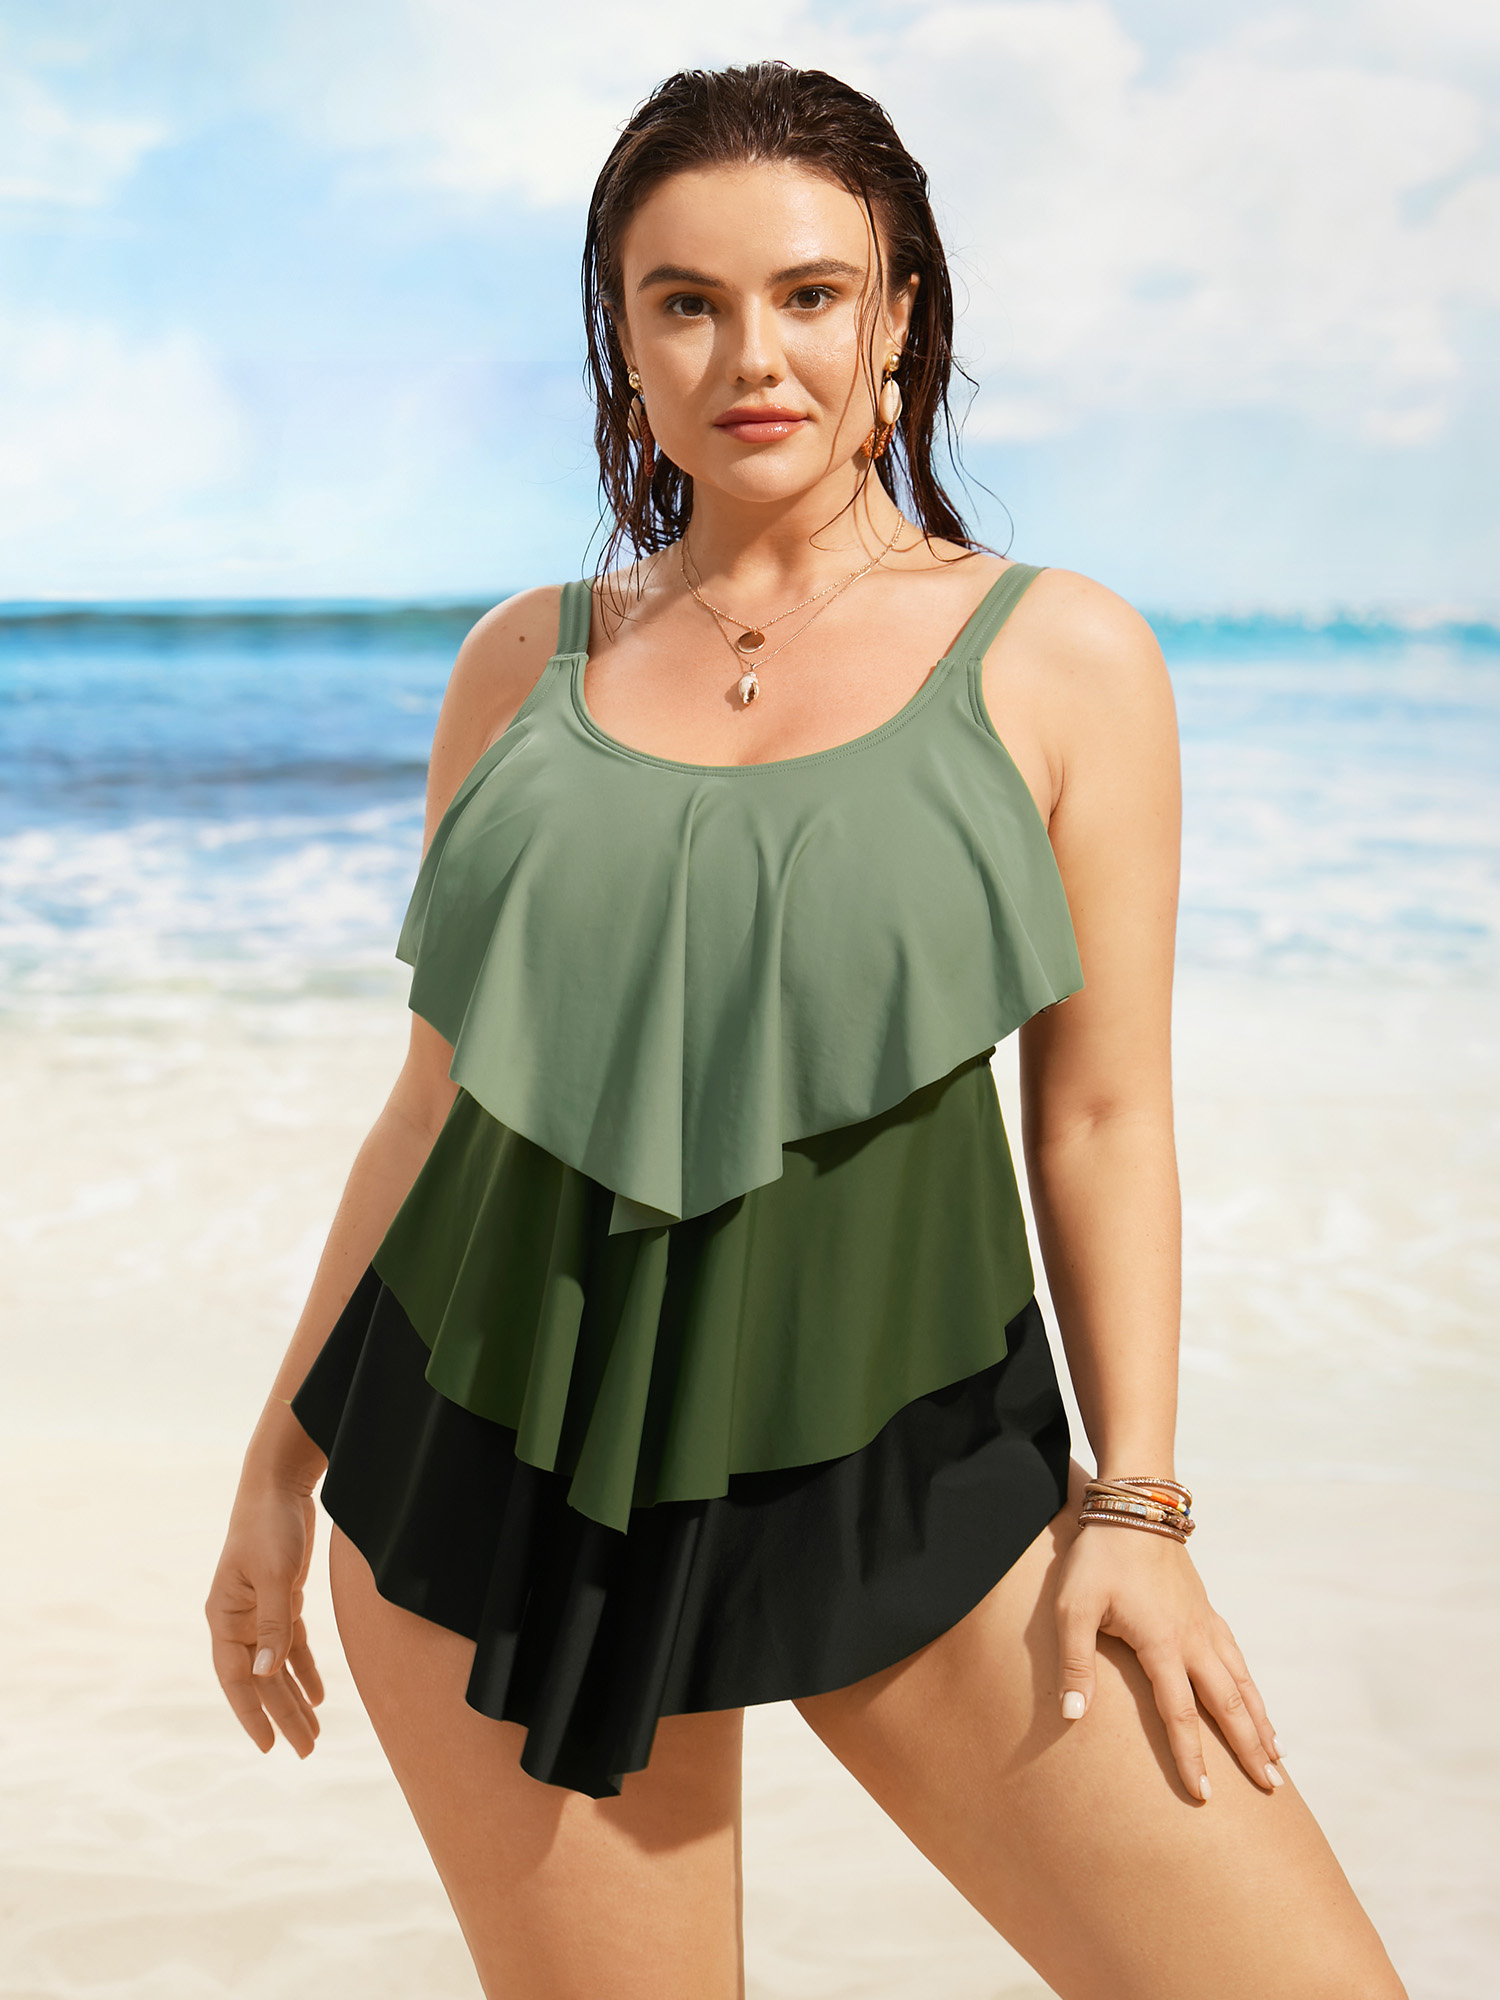 

Plus Size U Neck Contrast Tiered Ruffles One Piece Swimsuit Women's Swimwear ArmyGreen Beach Tiered Curve Bathing Suits High stretch One Pieces BloomChic